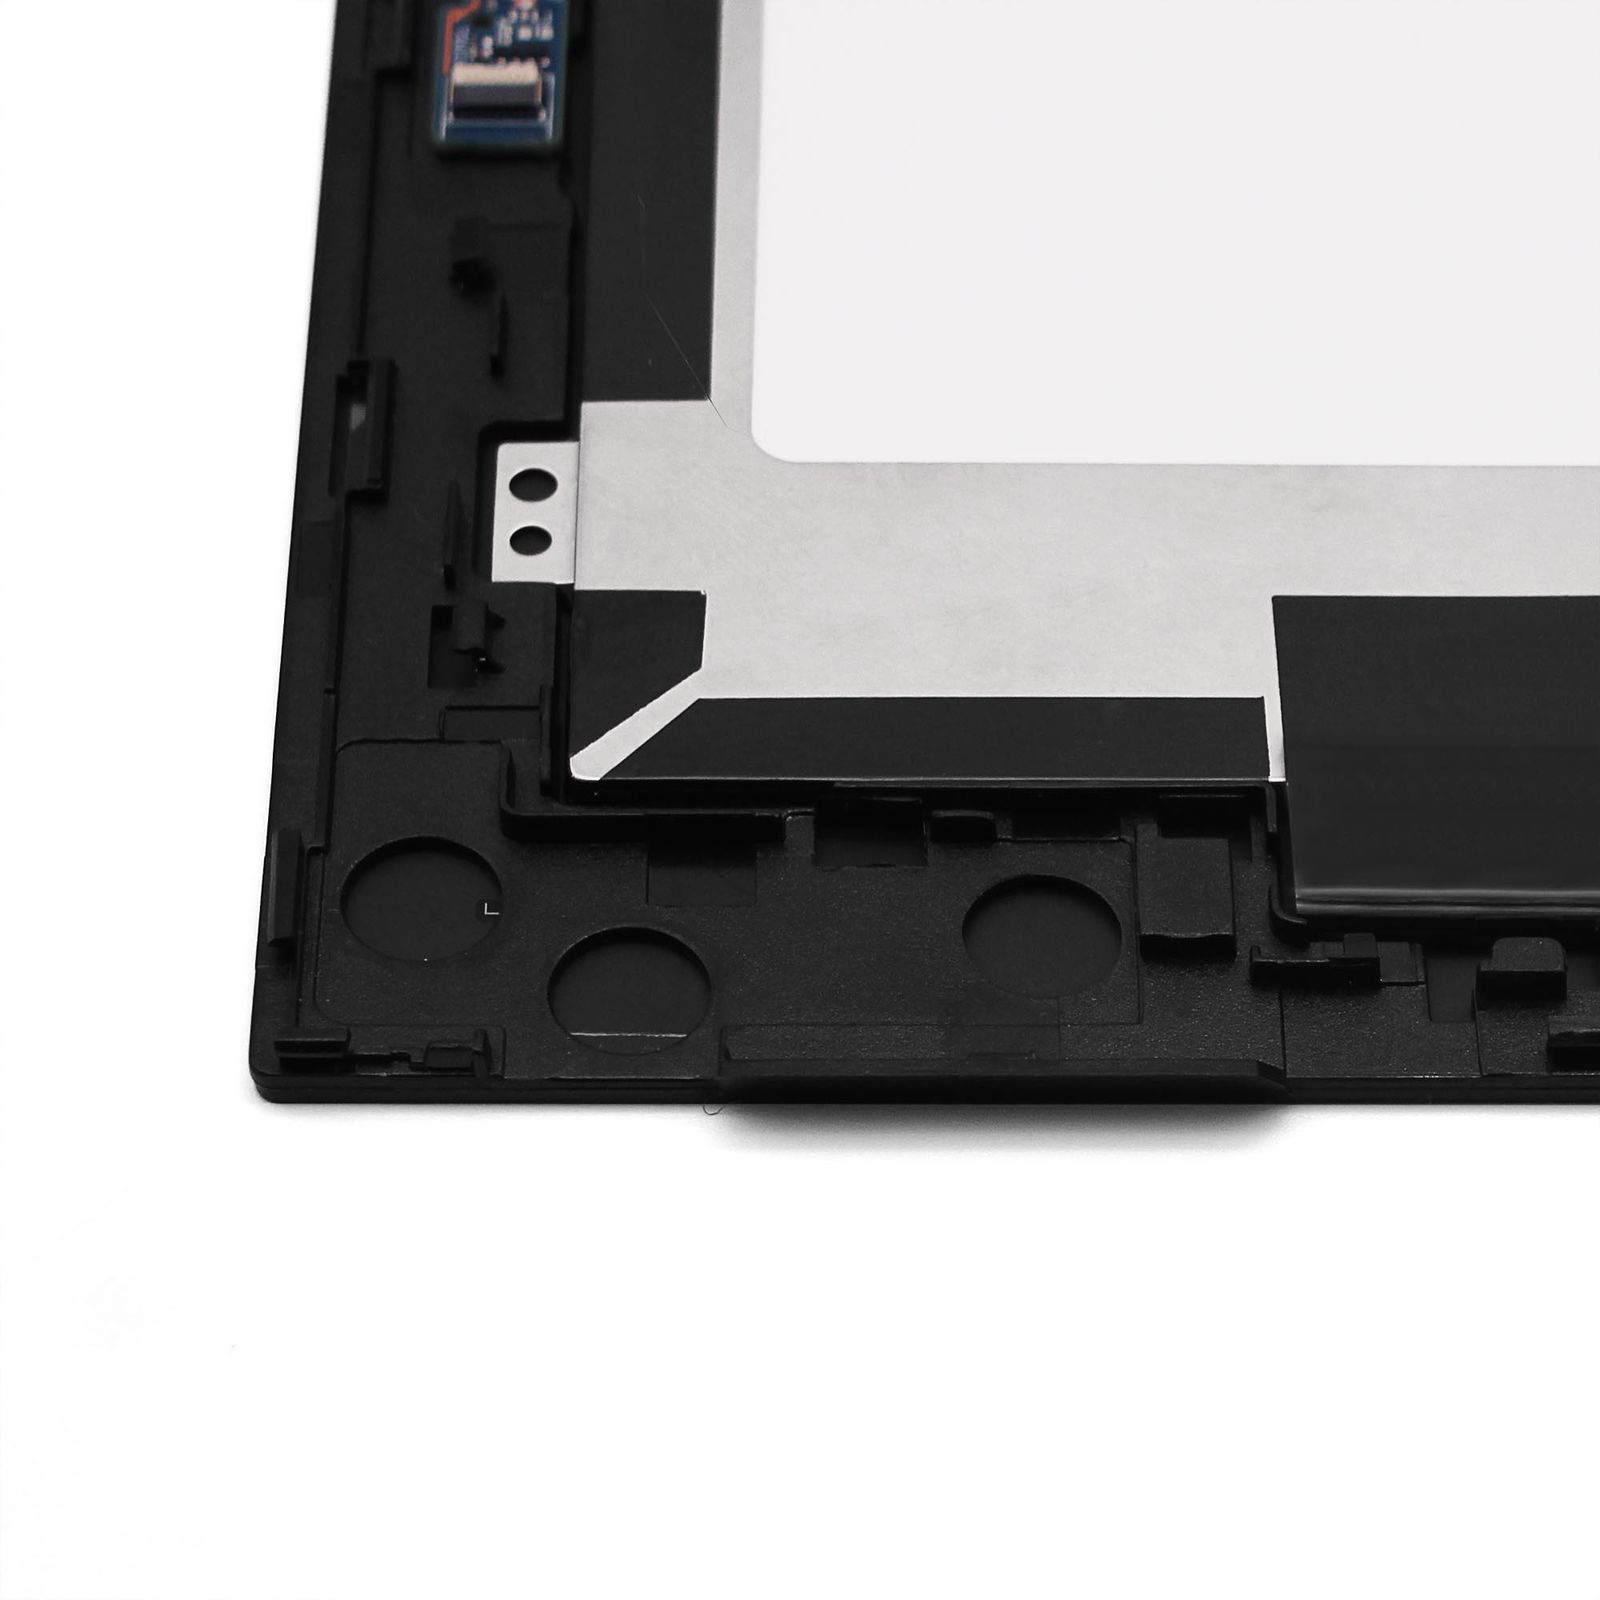 Screen Display Replacement For HP PAVILION 11-U111TU LCD Touch Digitizer Assembly